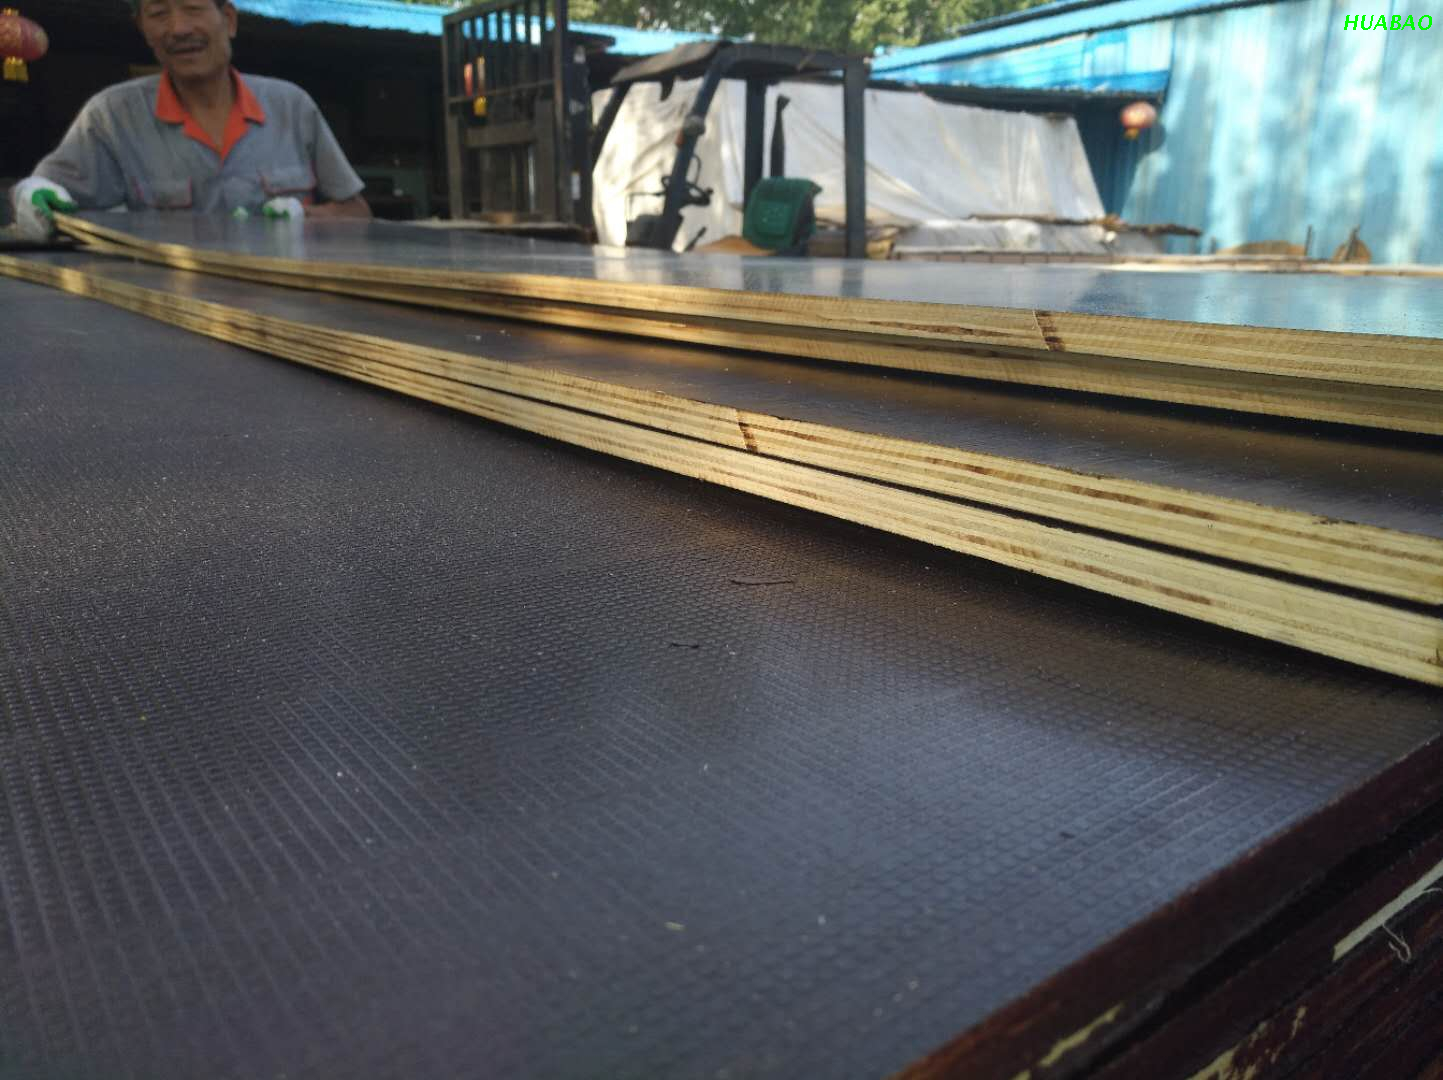 China Film Faced Plywood with Carb Certificate